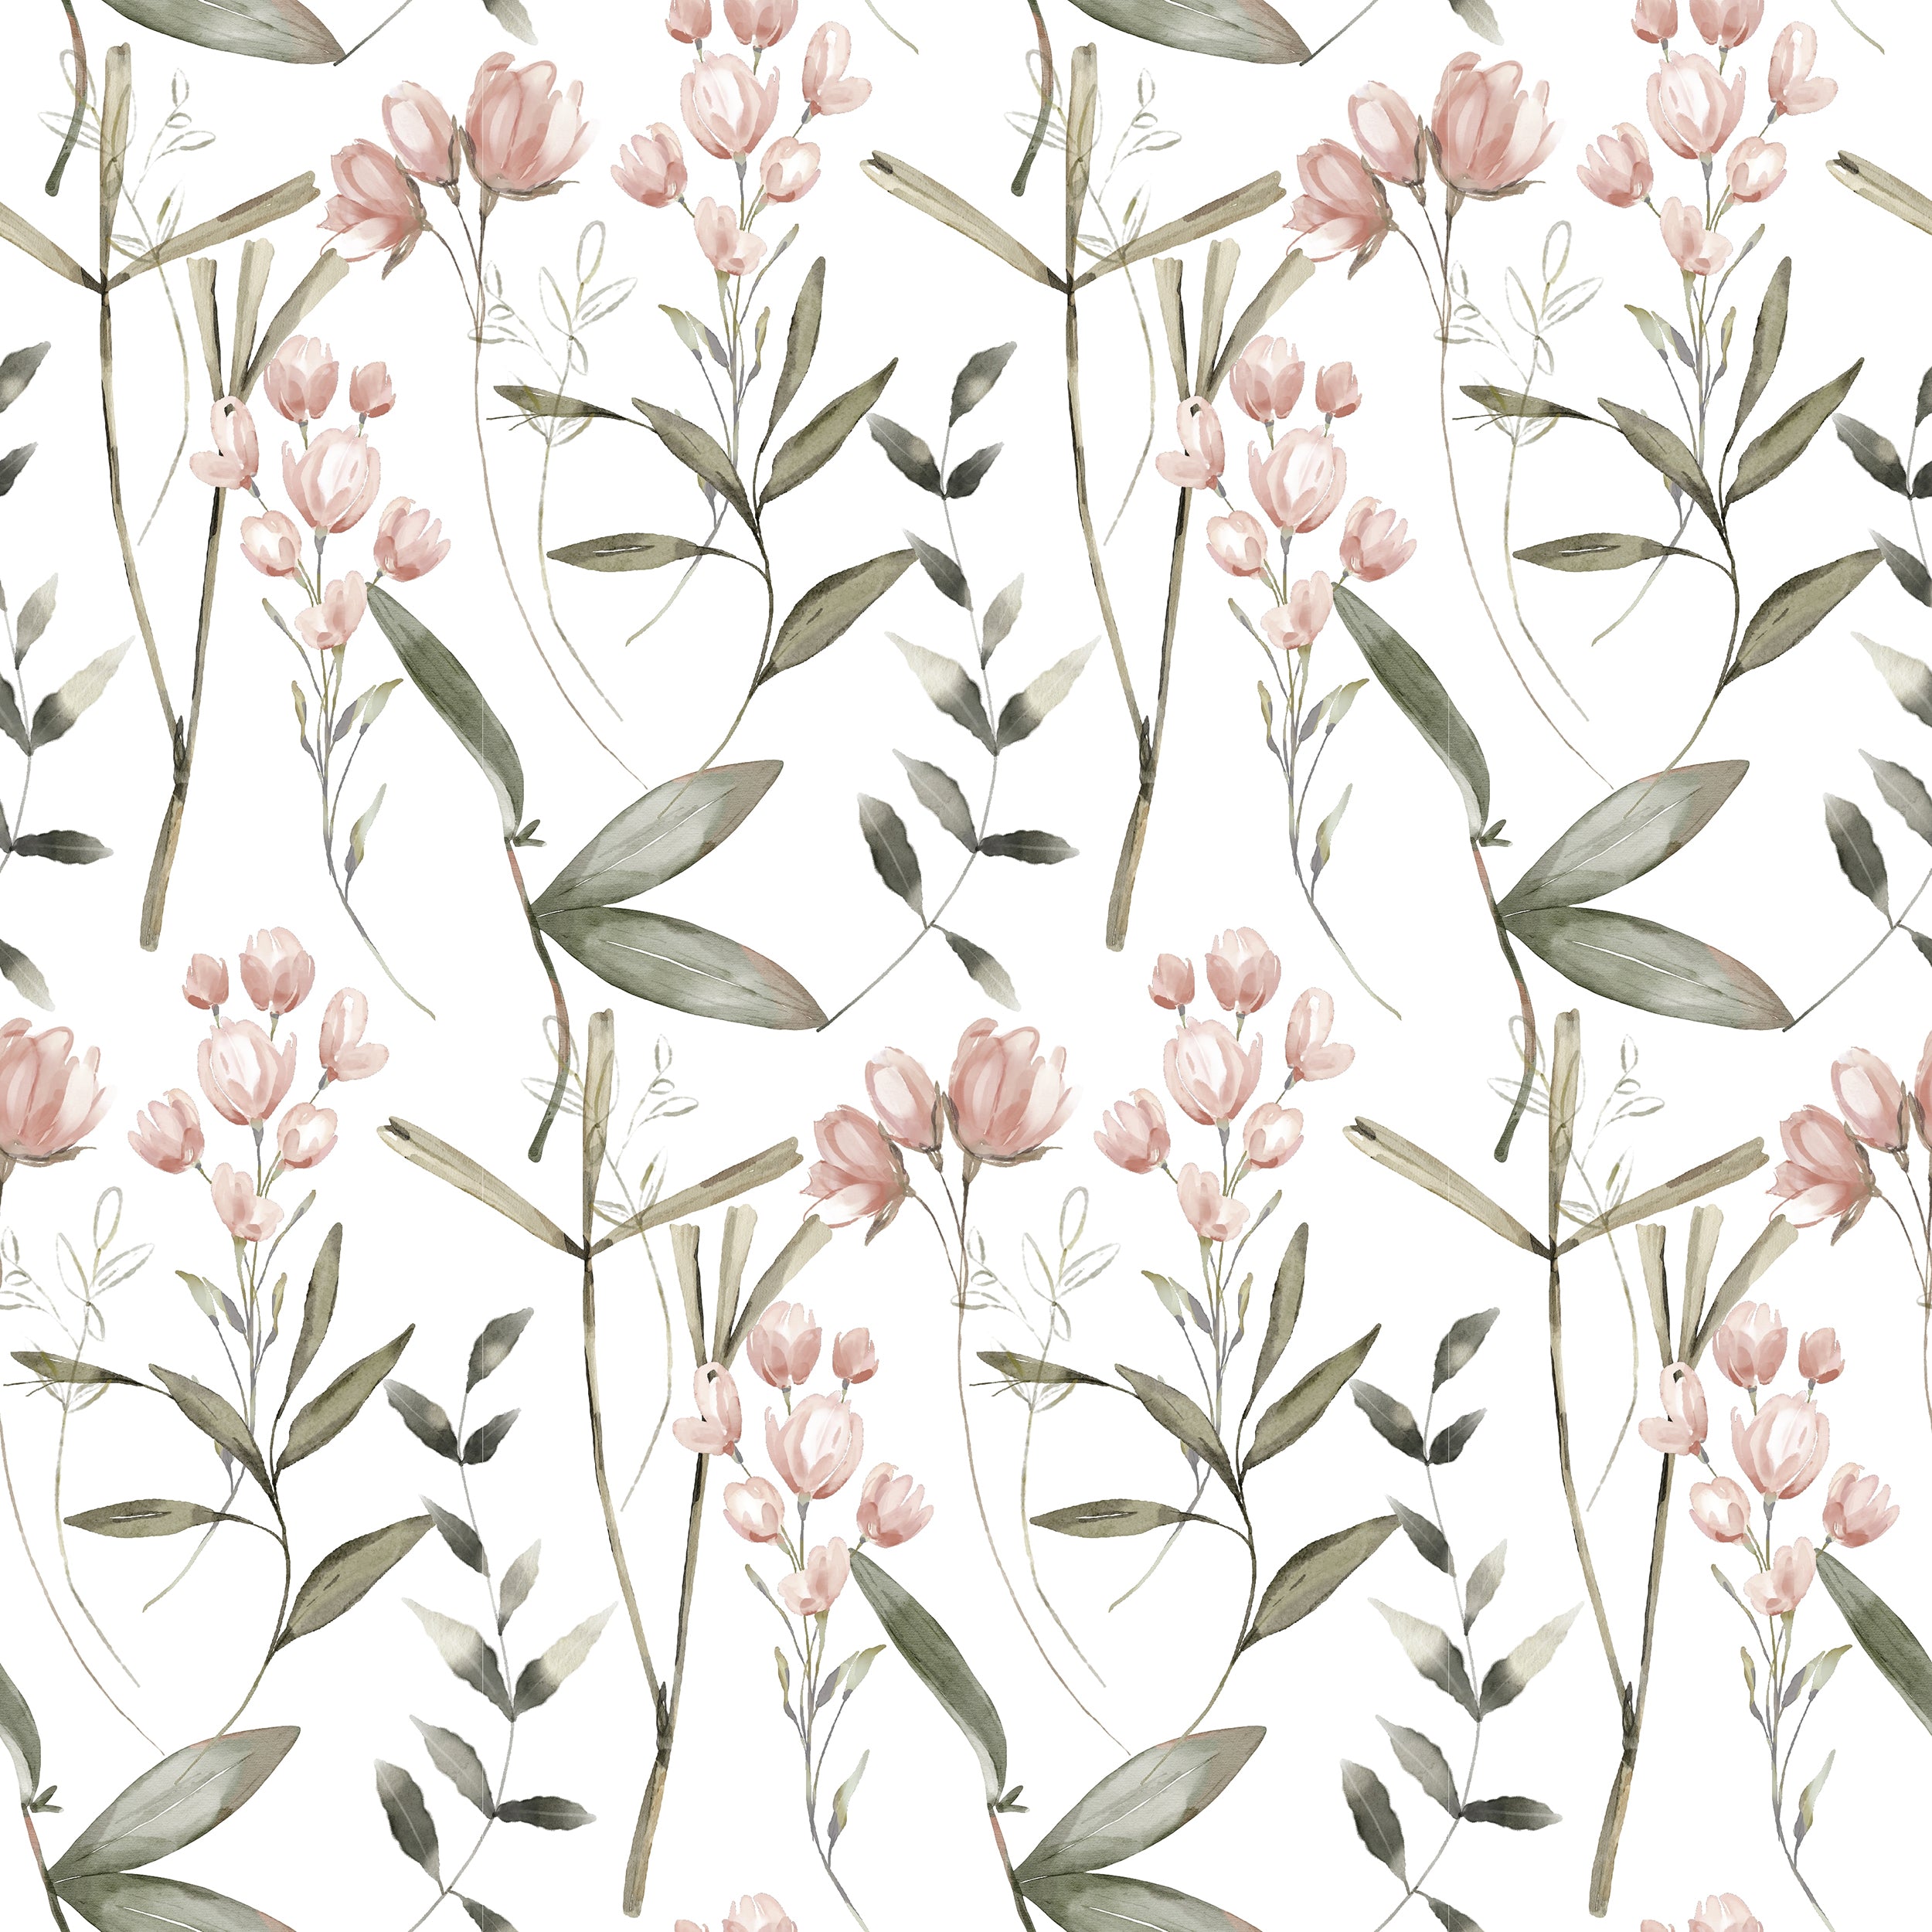 Close-up view of the Springtime Sonata Wallpaper, showcasing its intricate design of pale pink tulips and dark green foliage. The detailed botanical pattern is set against a crisp white backdrop, offering a fresh and vibrant look that is perfect for modern home decor